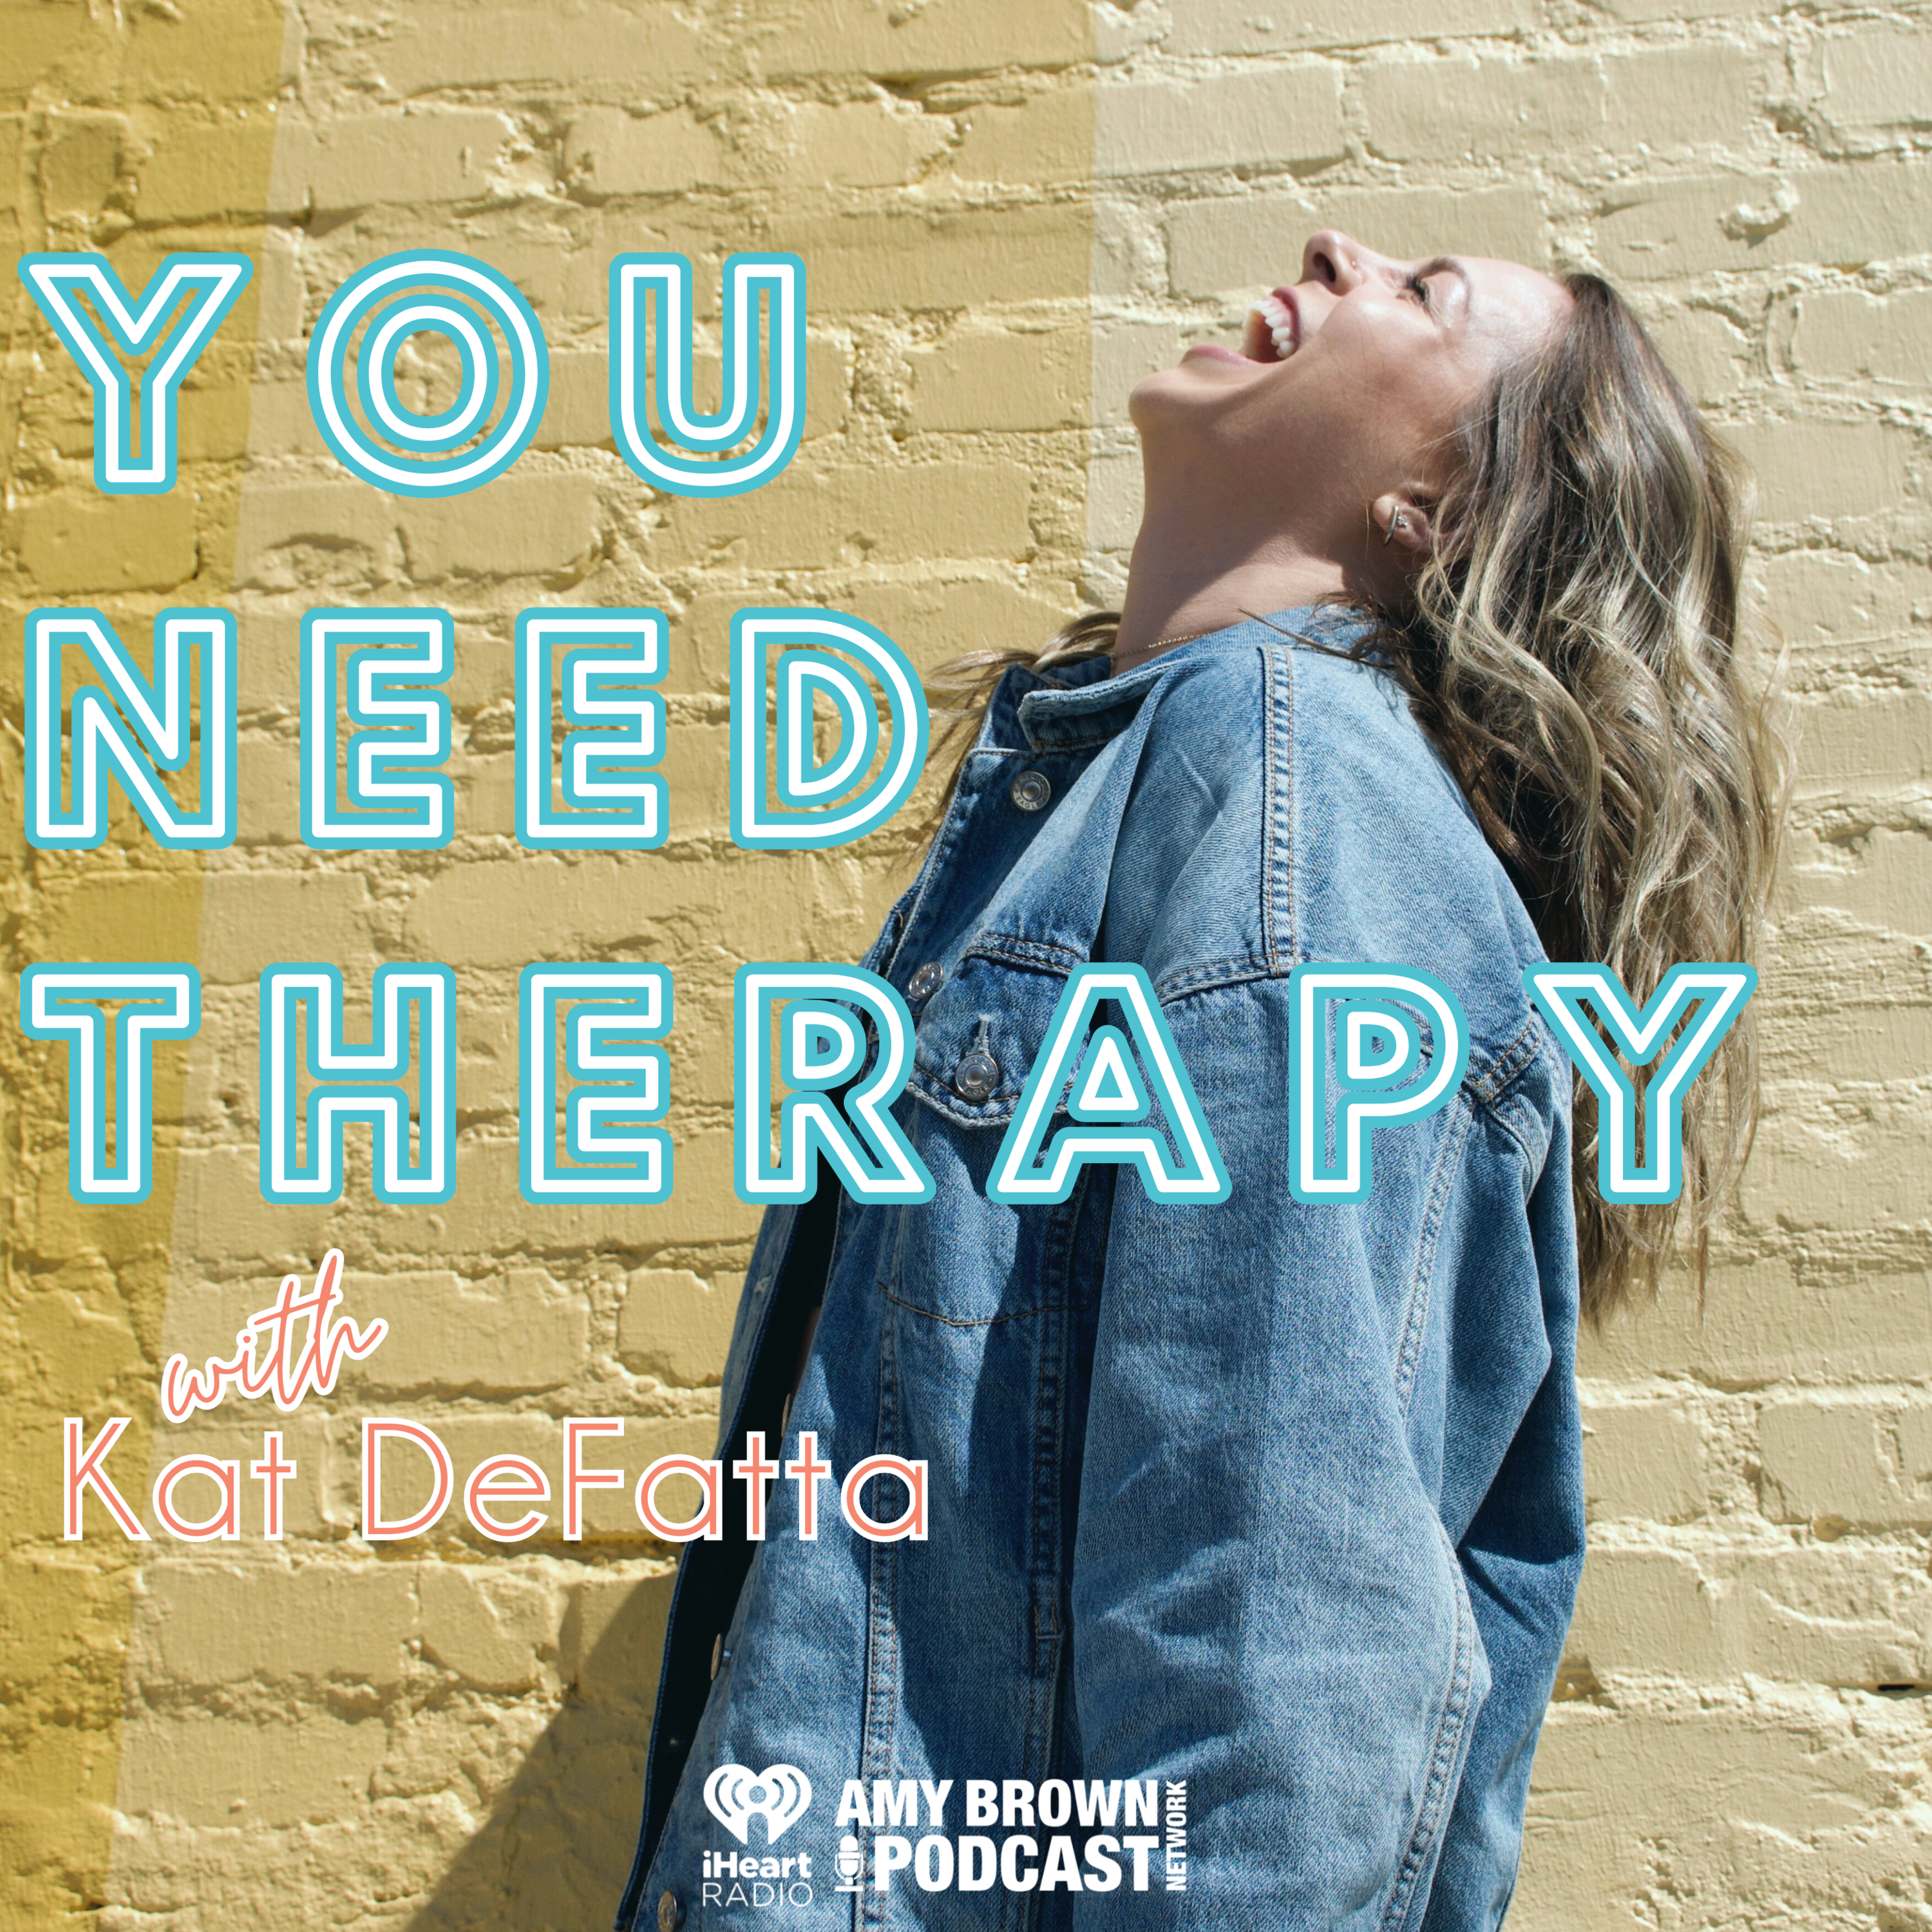 Couch Talks: Best & Worst Parts of Being a Therapist According to Kat